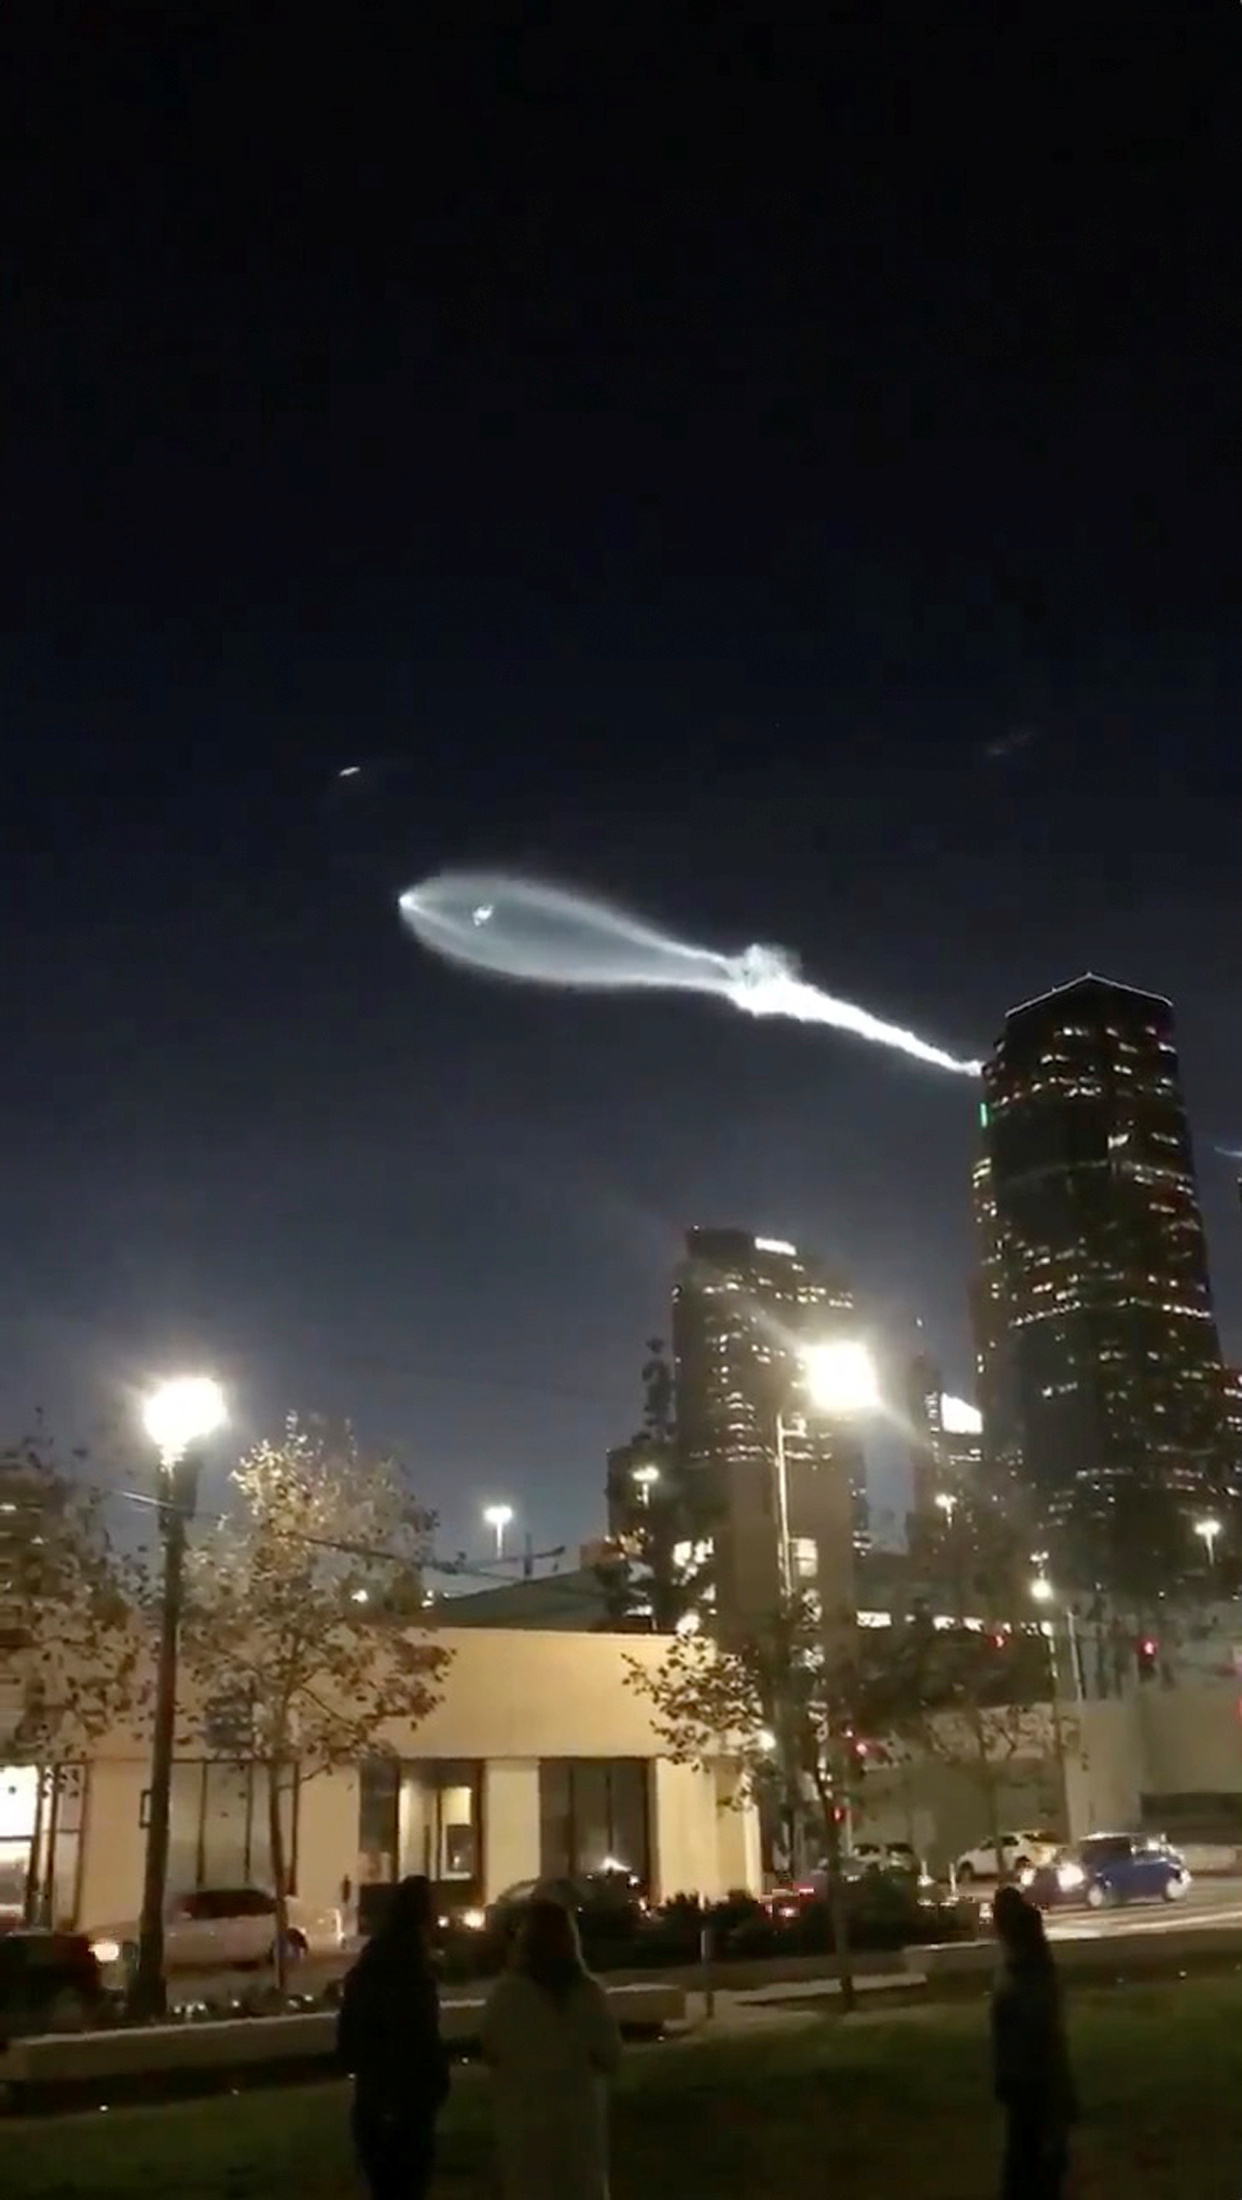 SpaceX's Falcon 9 rocket lifts off in the air, as seen from Los Angeles, California